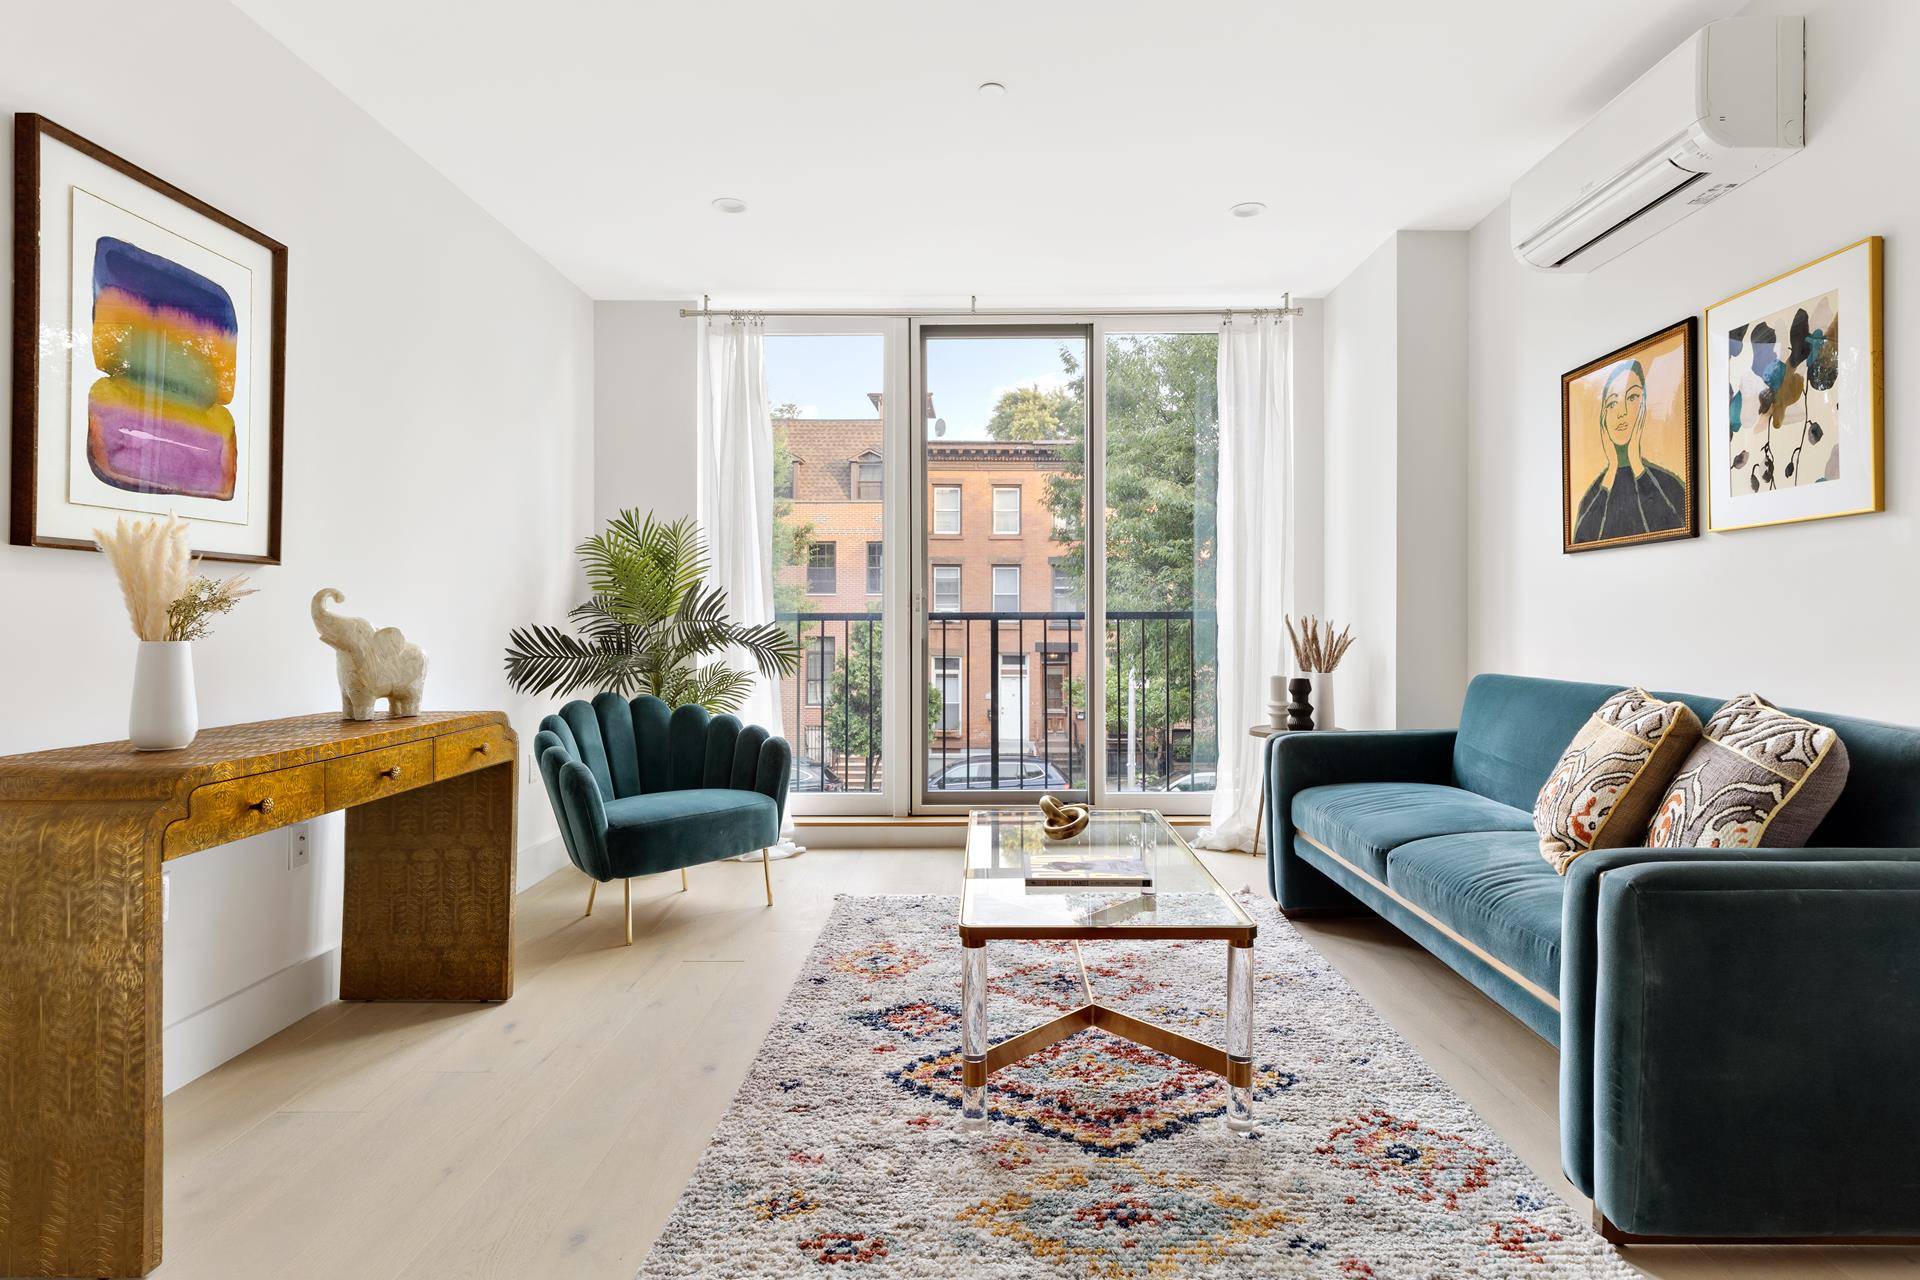 Welcome to 107 Madison Street, nestled quietly on a tree lined street in one of the most favorable pockets of Bedford Stuyvesant just a block and a half from the ...